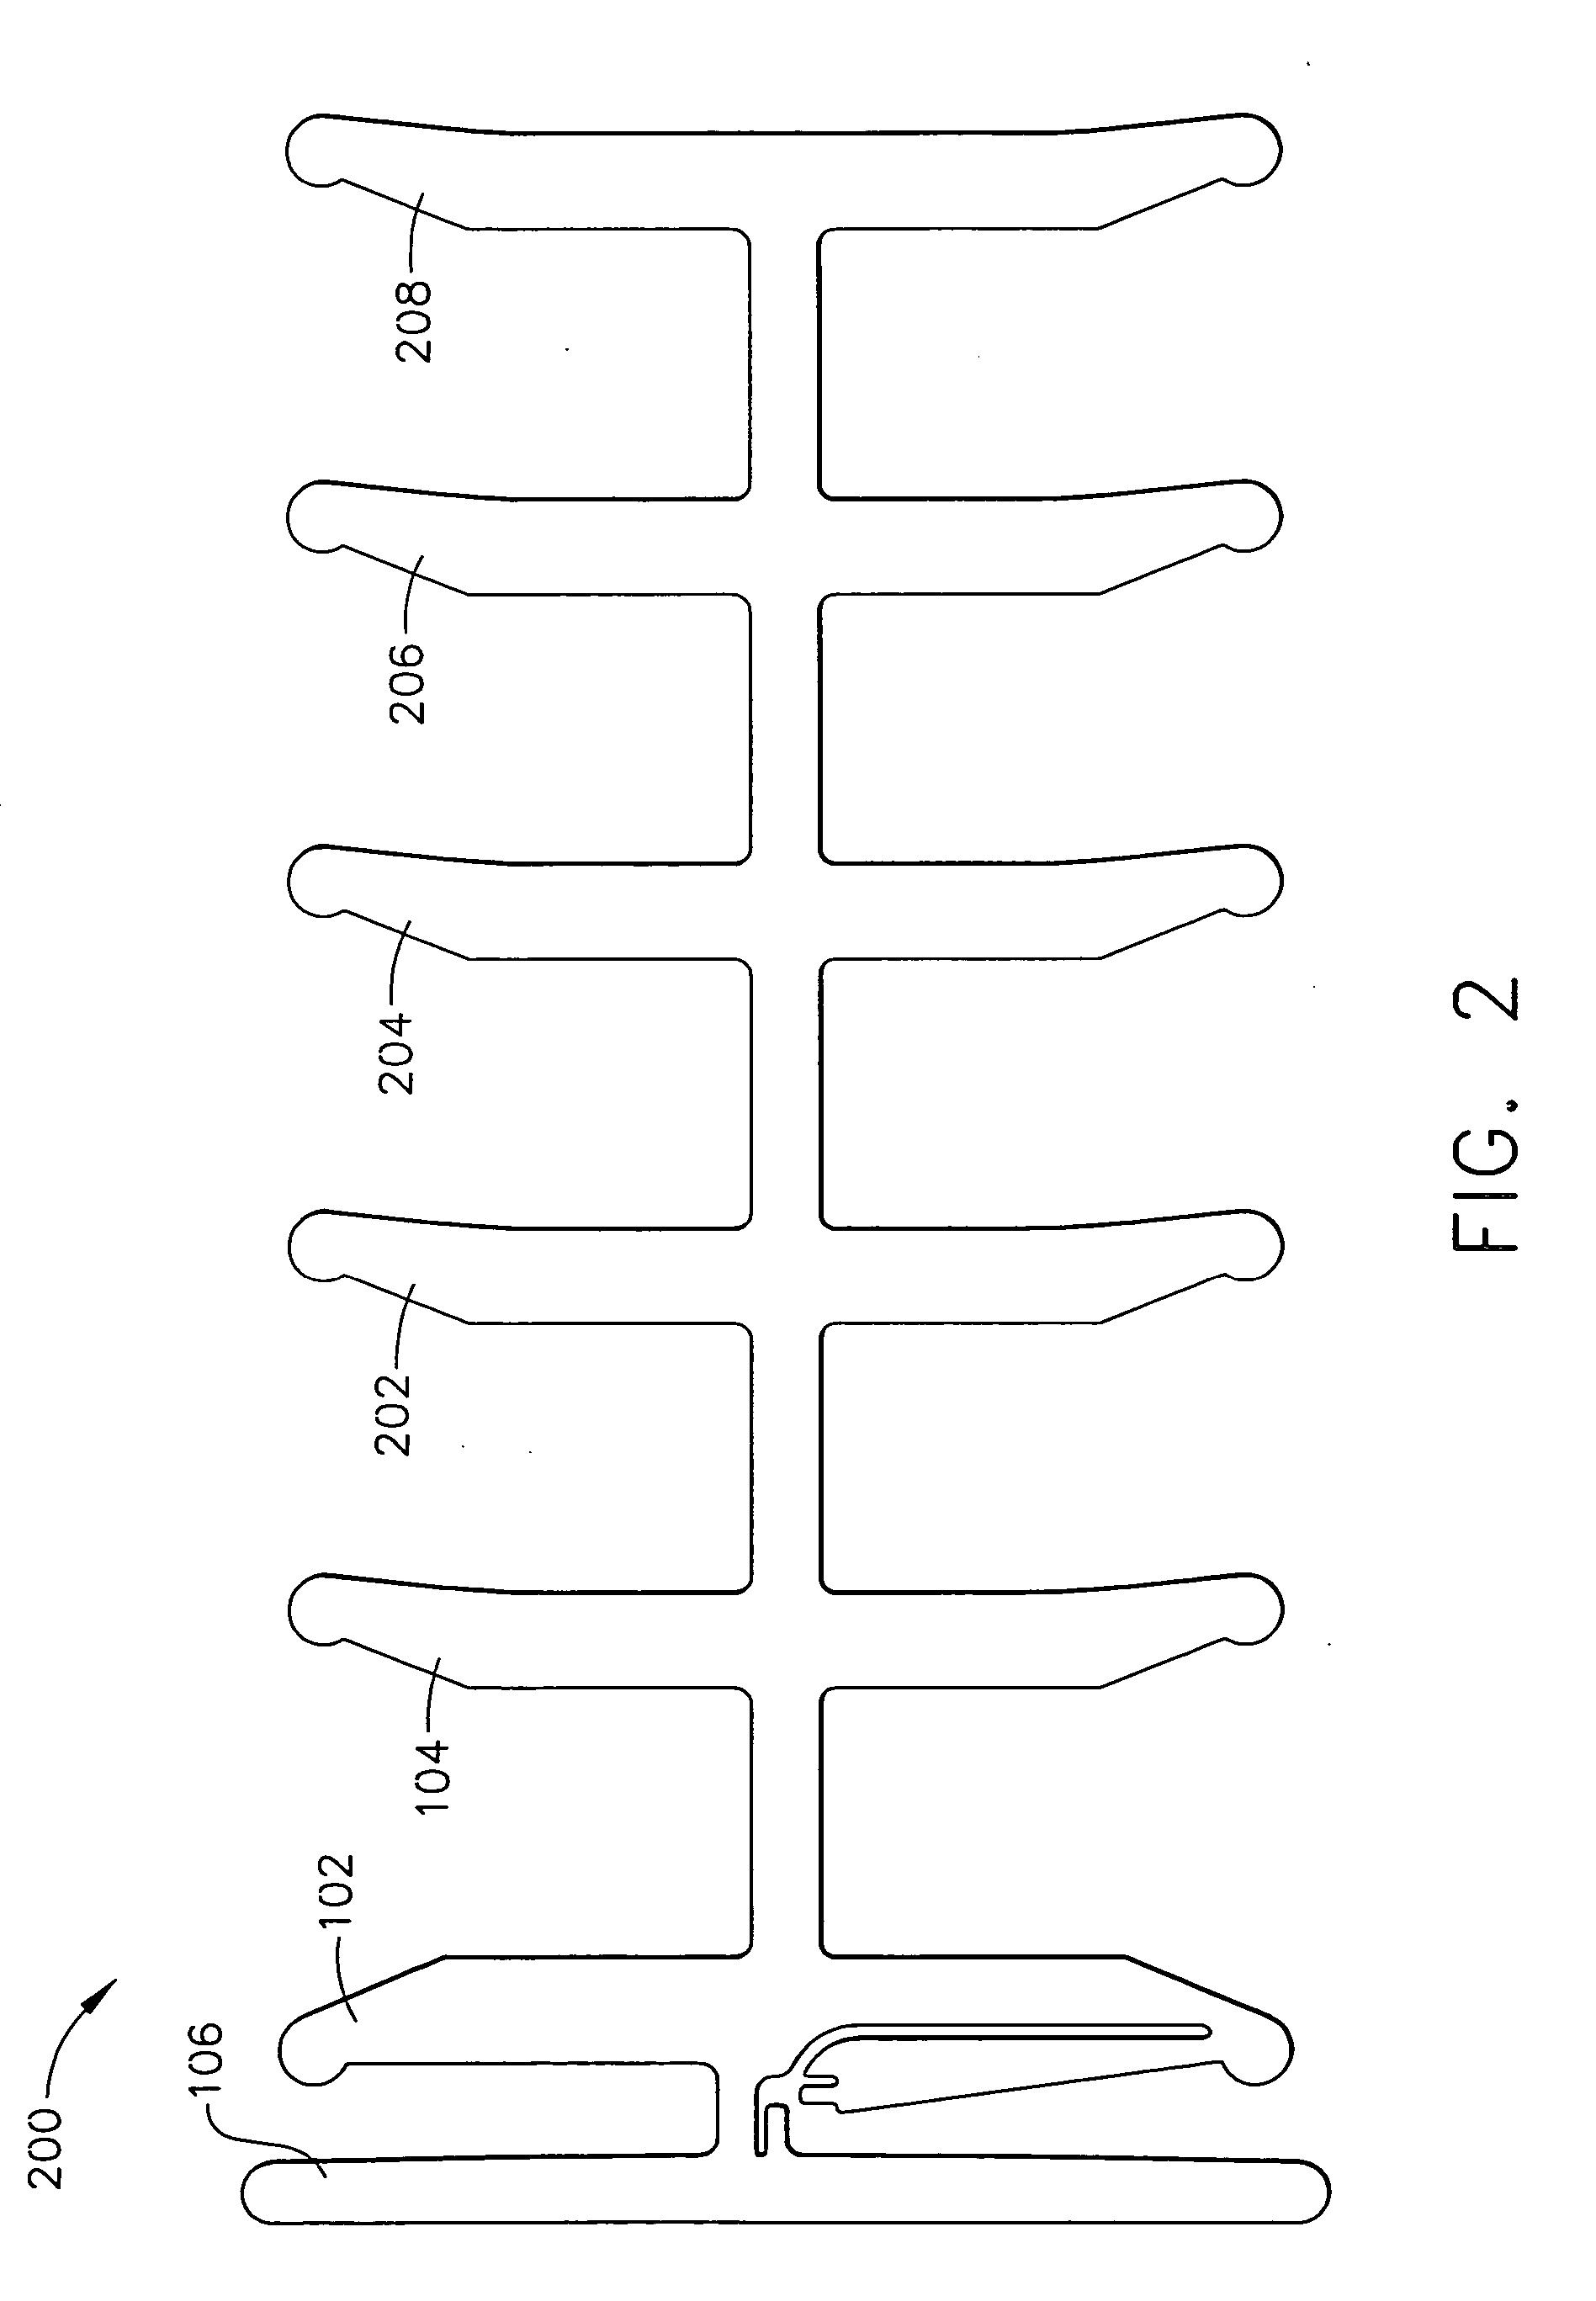 Multi-frequency RFID apparatus and methods of reading RFID tags